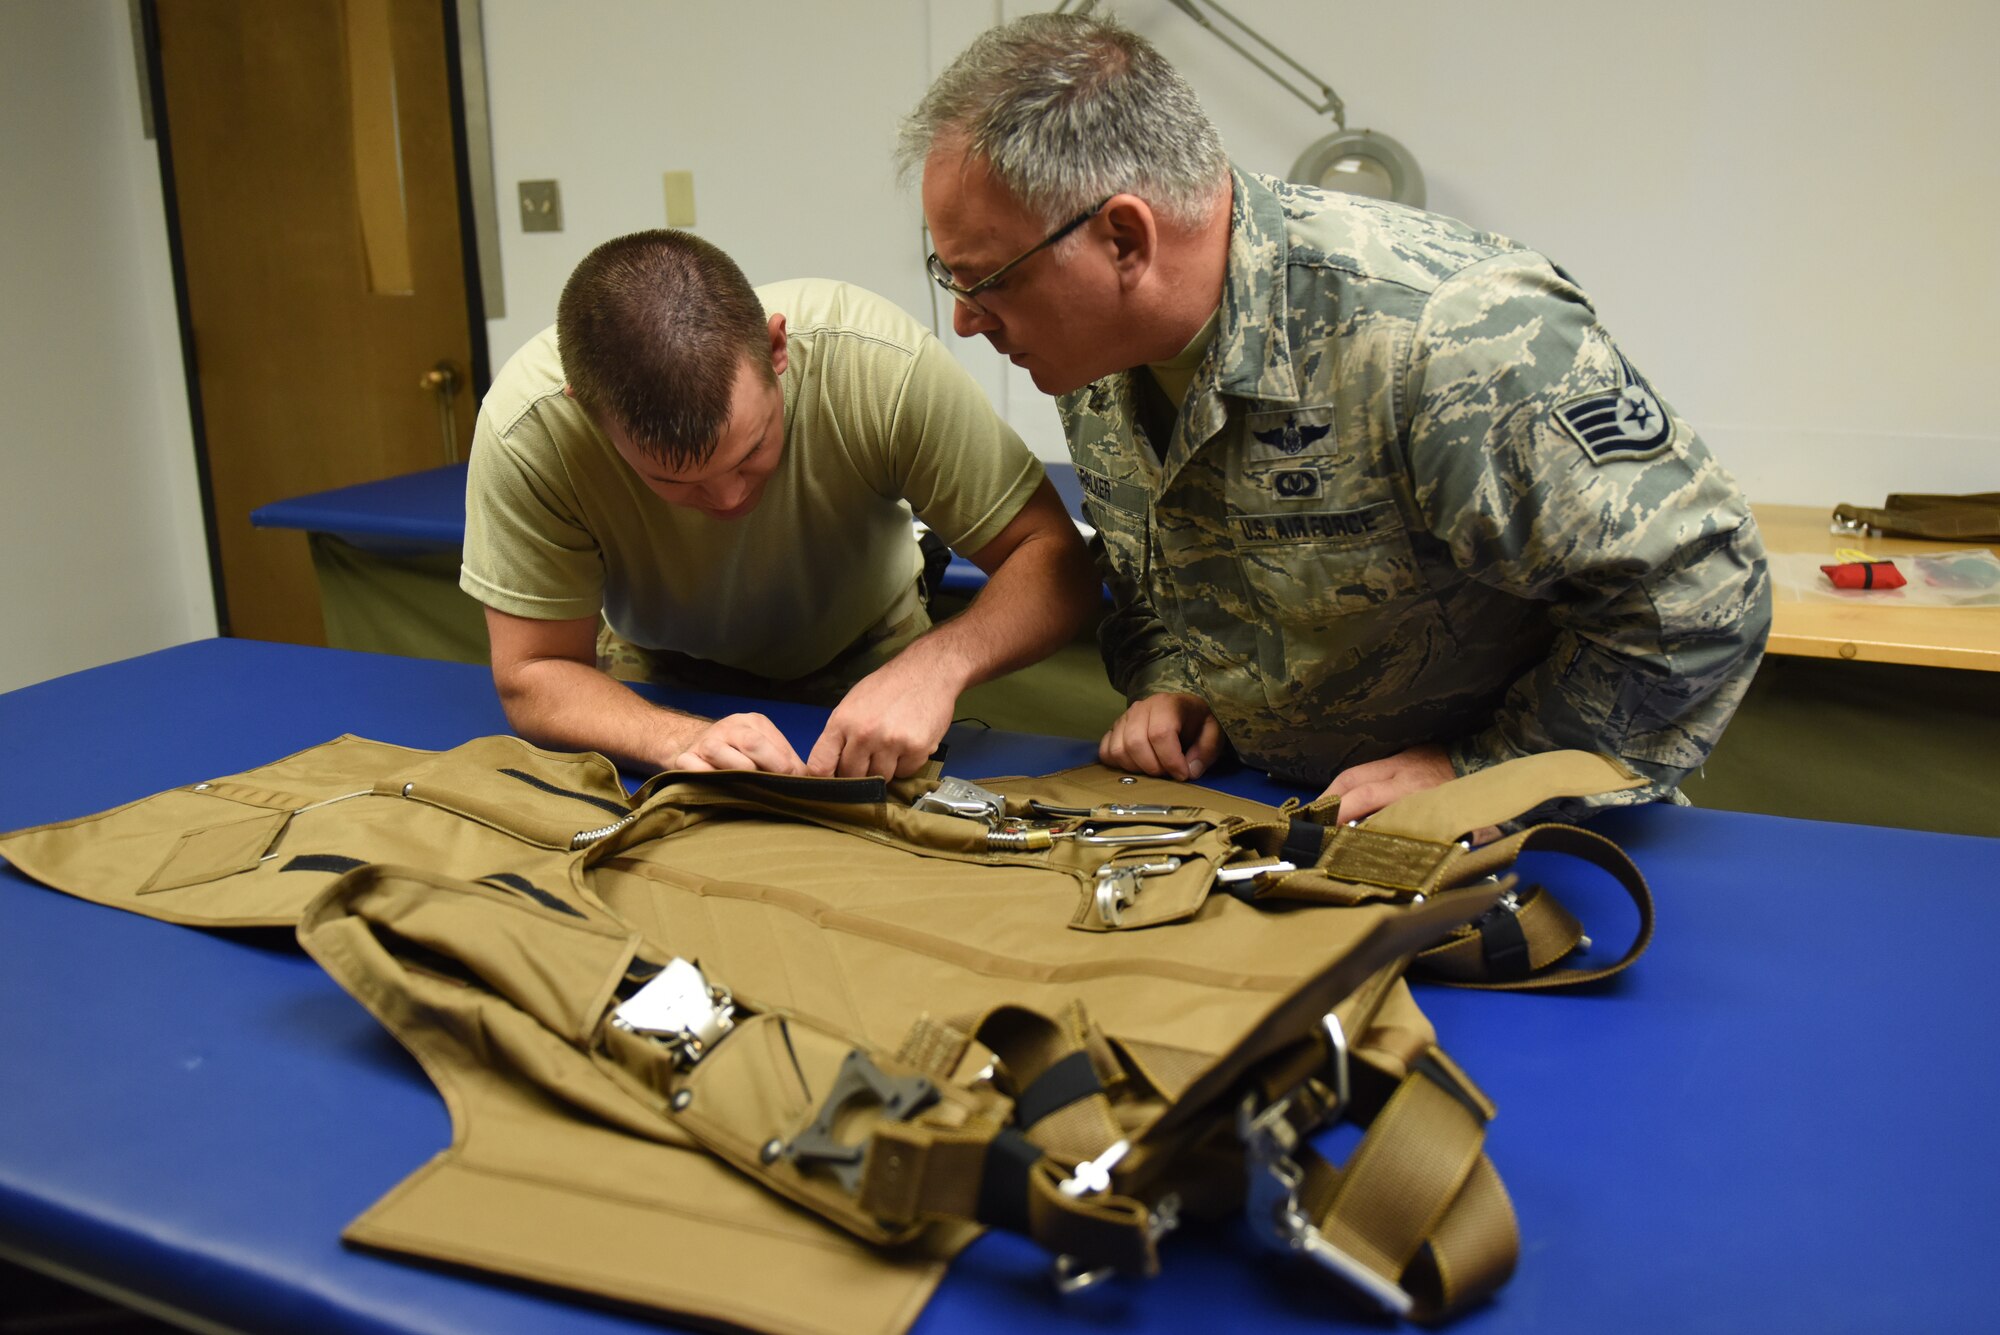 Tech. Sgt. Kurt Mellott and Staff Sgt. Stephen Falker, aircrew flight equipment technicians with the 193rd Special Operations Support Squadron, Middletown, Pennsylvania, Pennsylvania Air National Guard, build a Low-Profile Parachute from scratch Aug. 9, 2018. The new parachutes replaced the old ones, which were originally constructed in the 1980’s. (U.S. Air National Guard photo by Senior Airman Julia Sorber/Released)